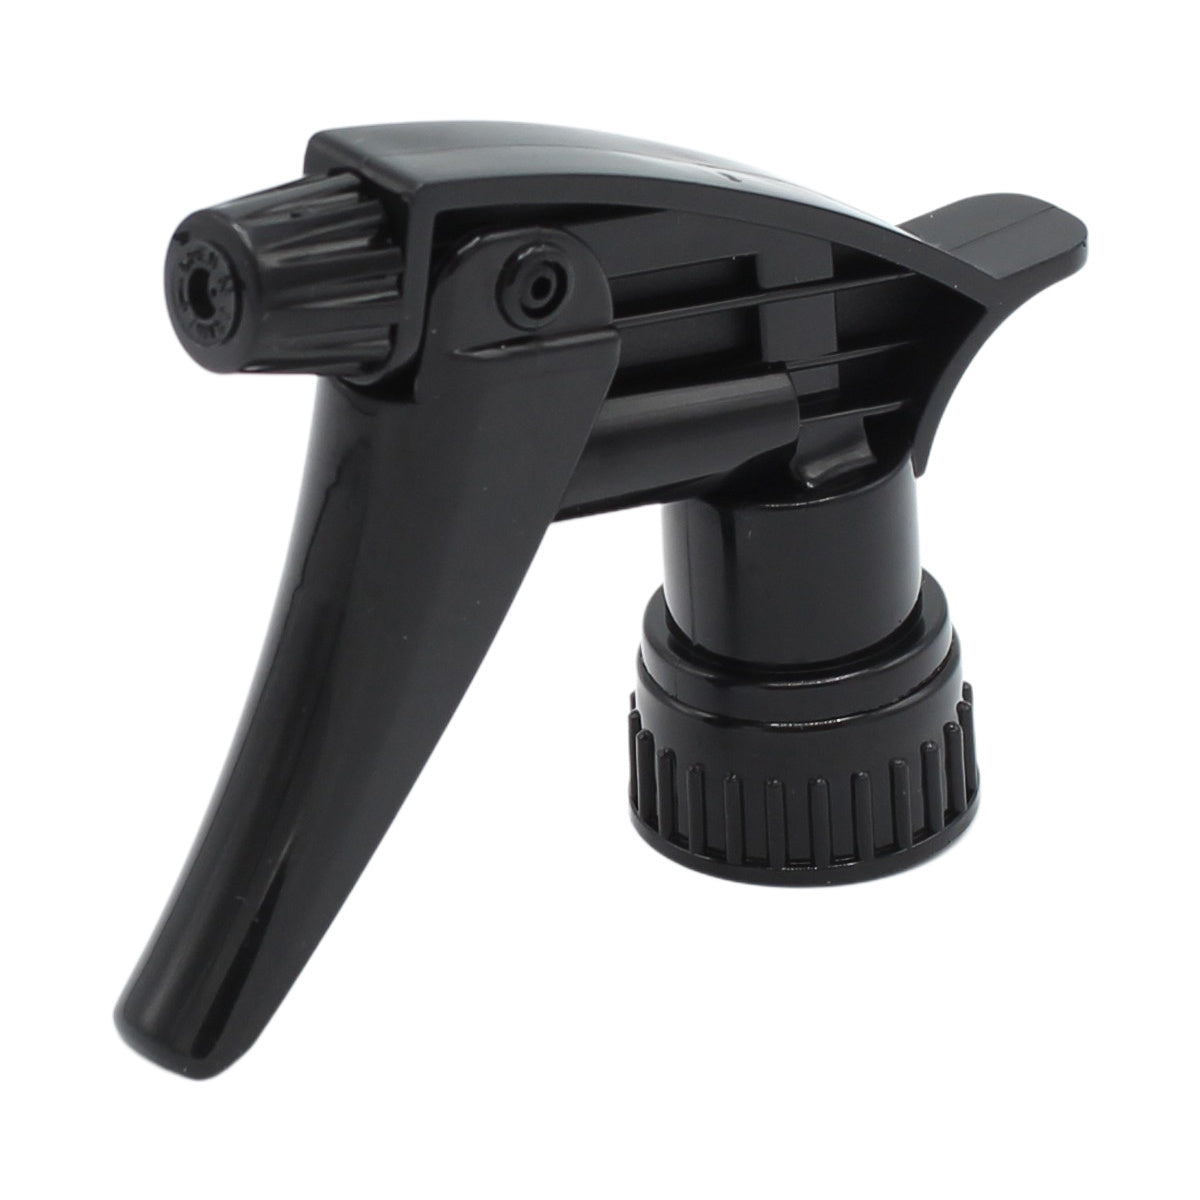 Alkaline and solvent Heavy Duty Industrial Trigger Sprayer offer much extreme resistance to different types of chemicals. Black trigger